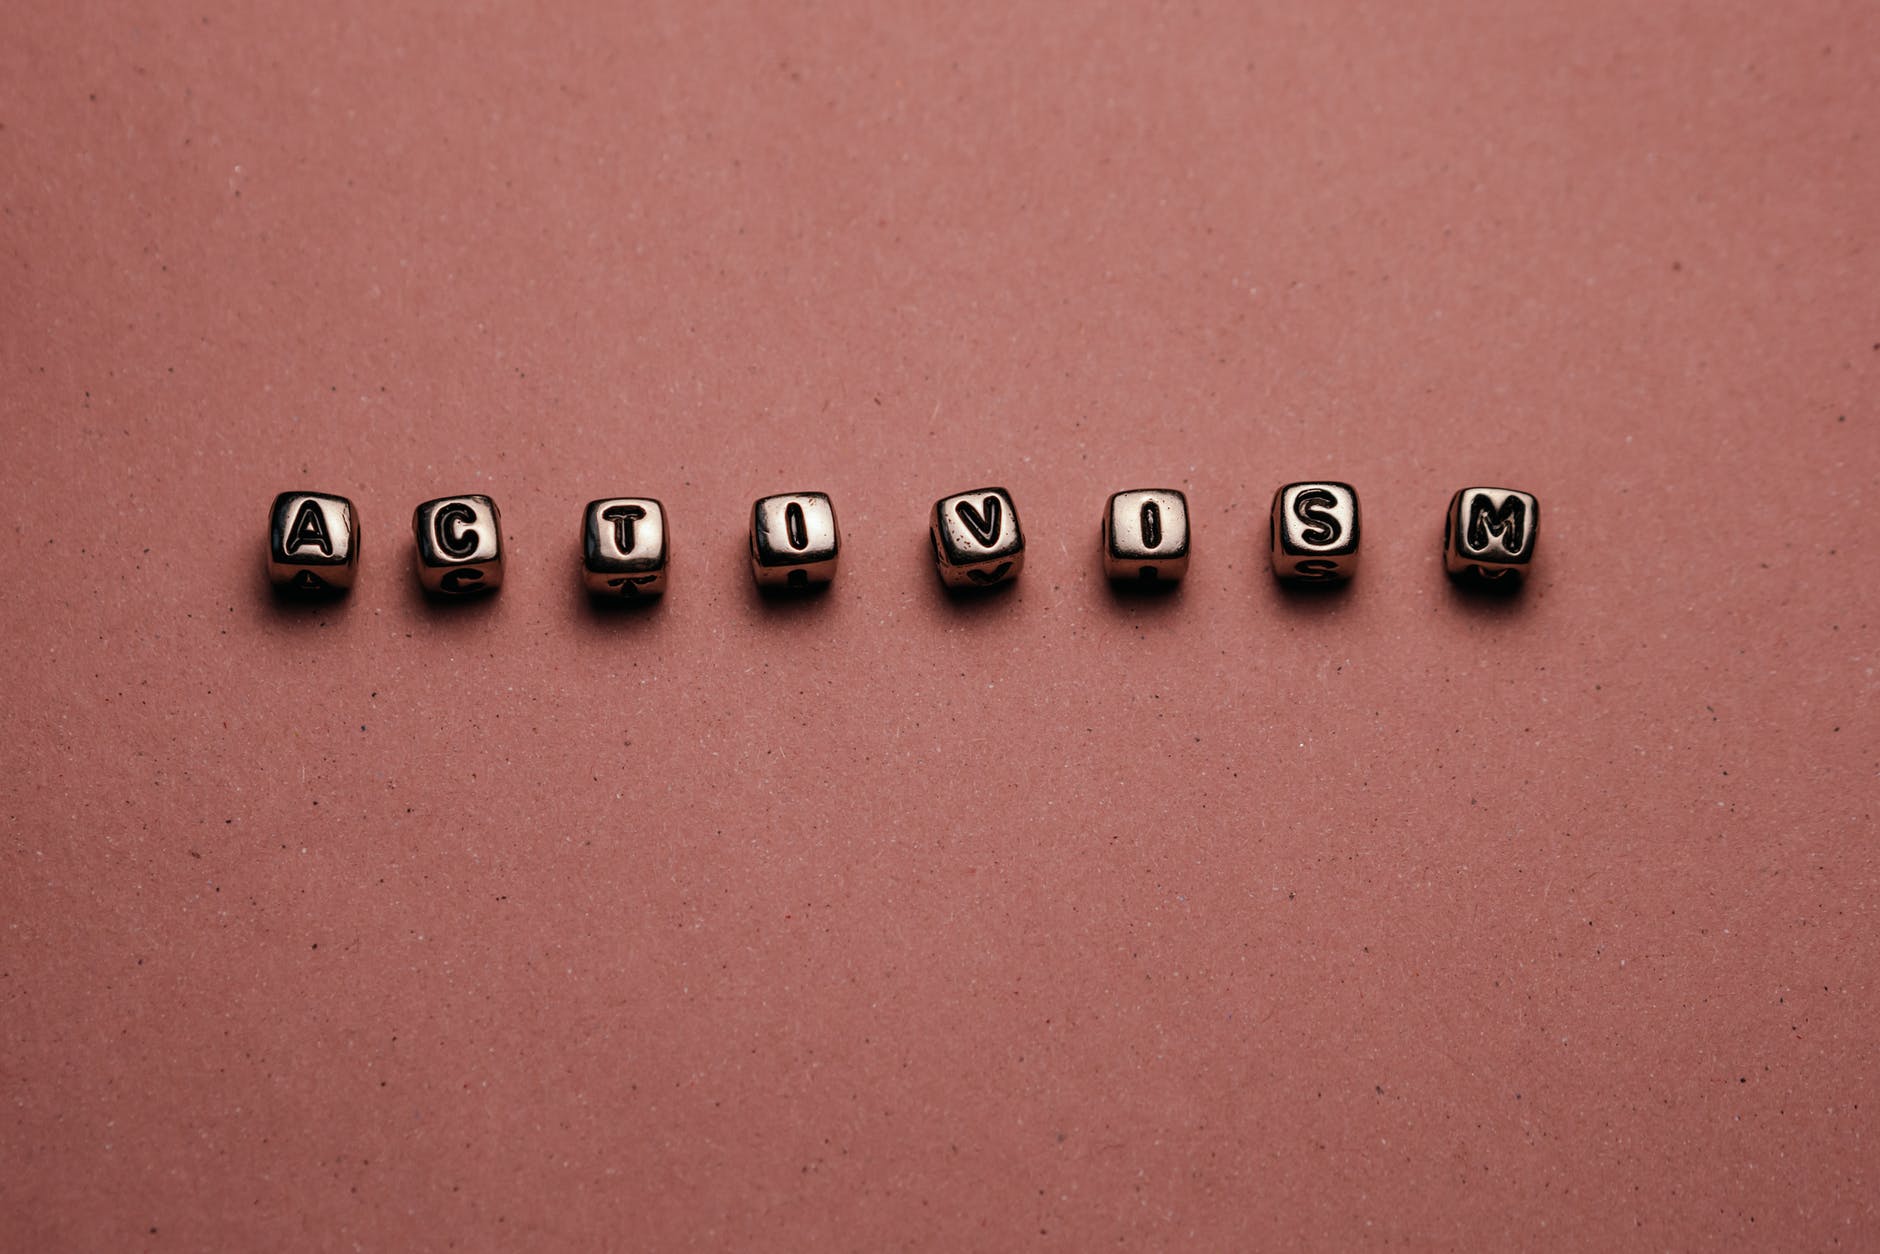 beads with letters